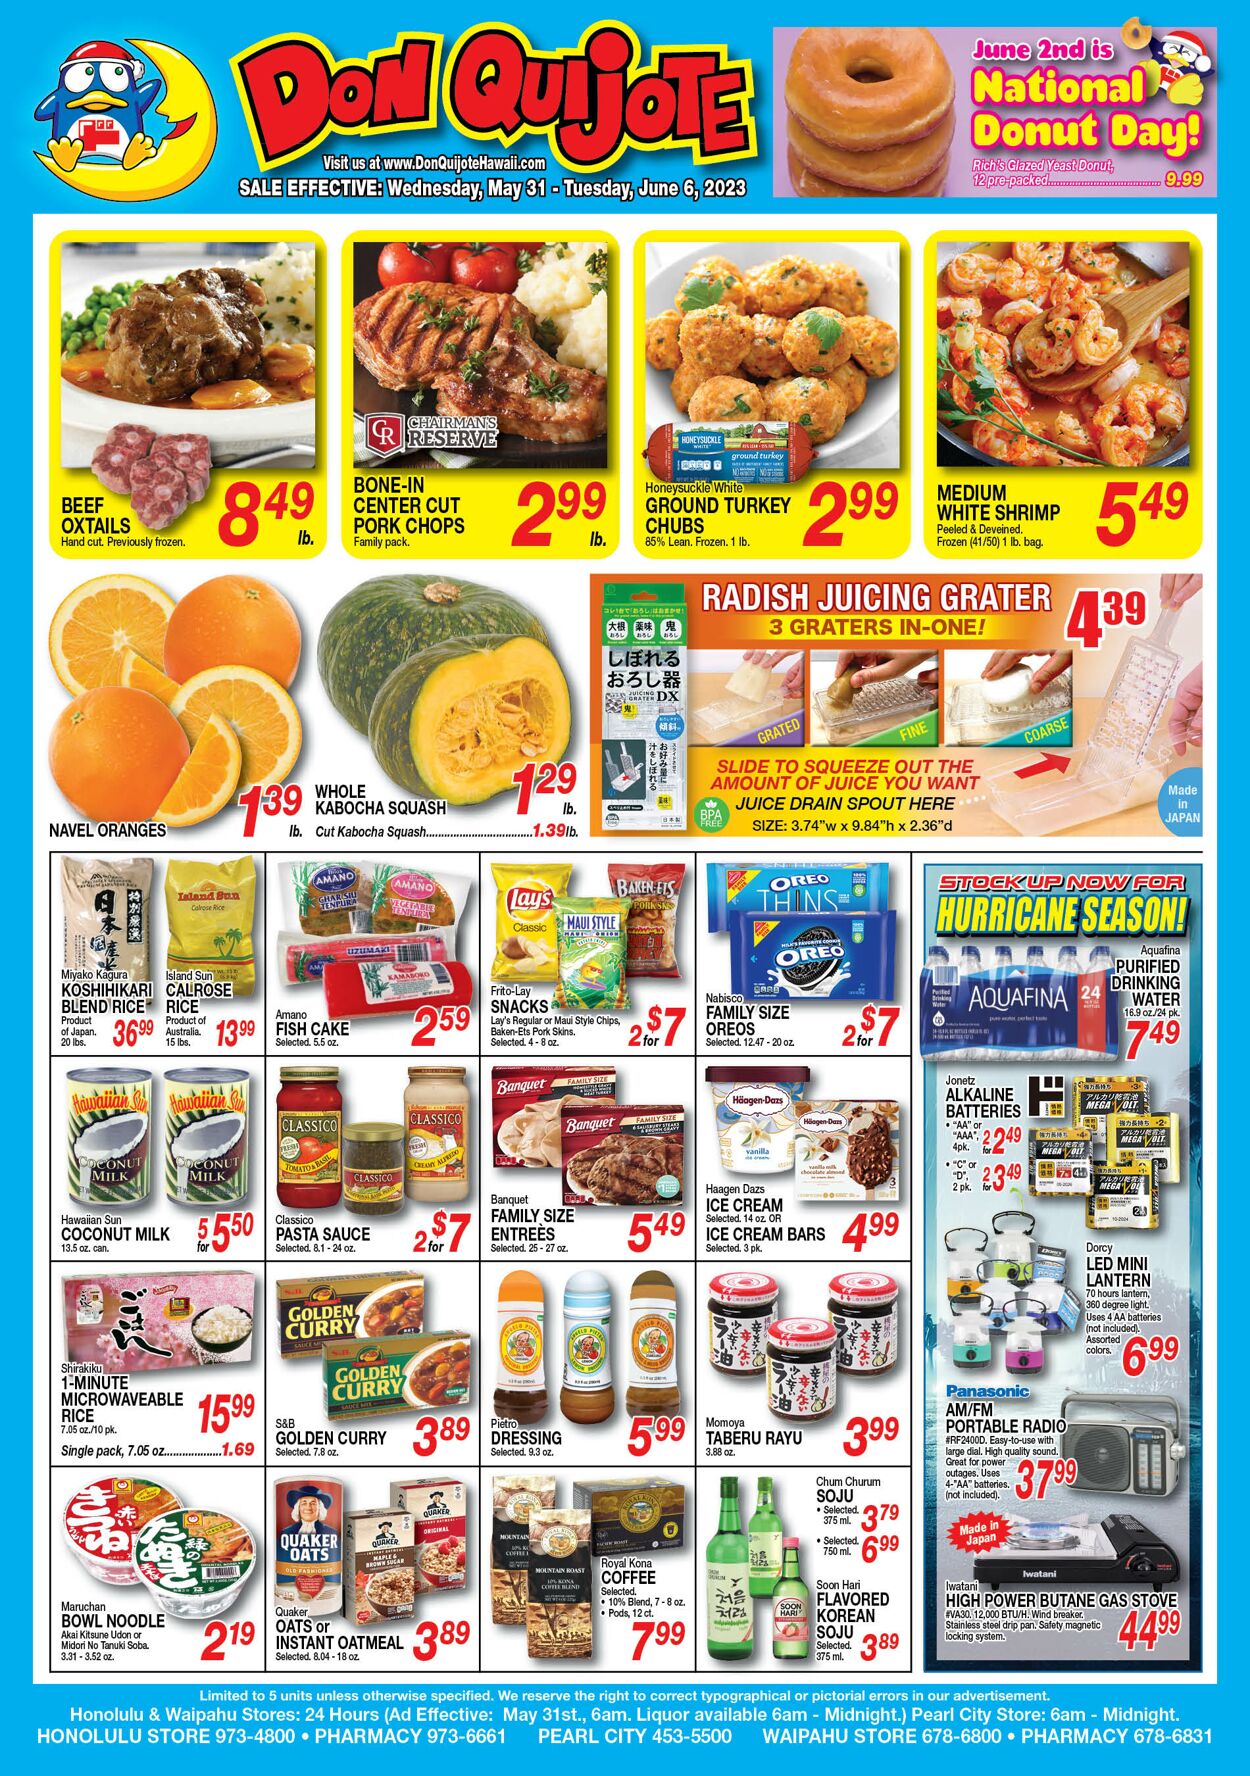 Don Quijote Hawaii Ad from 05/31/2023